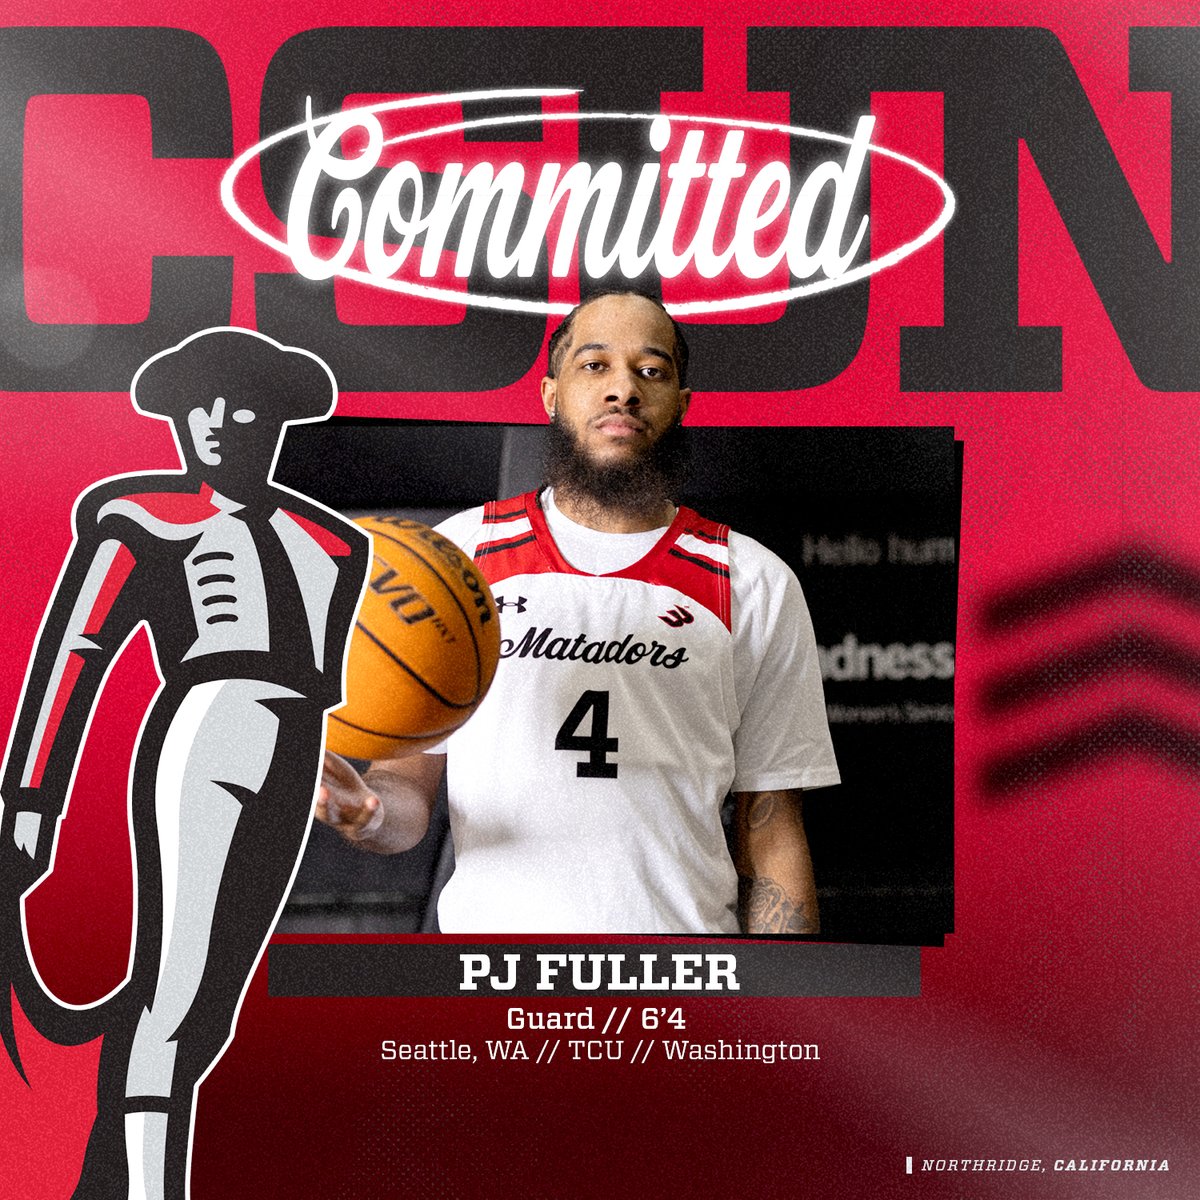 Stud signing. 🚨 In four combined years at TCU and Washington, PJ Fuller played in 115 games, totaling 727 points, 221 rebounds, 185 assists, and 102 steals. #GoMatadors x @PhilipPJFuller